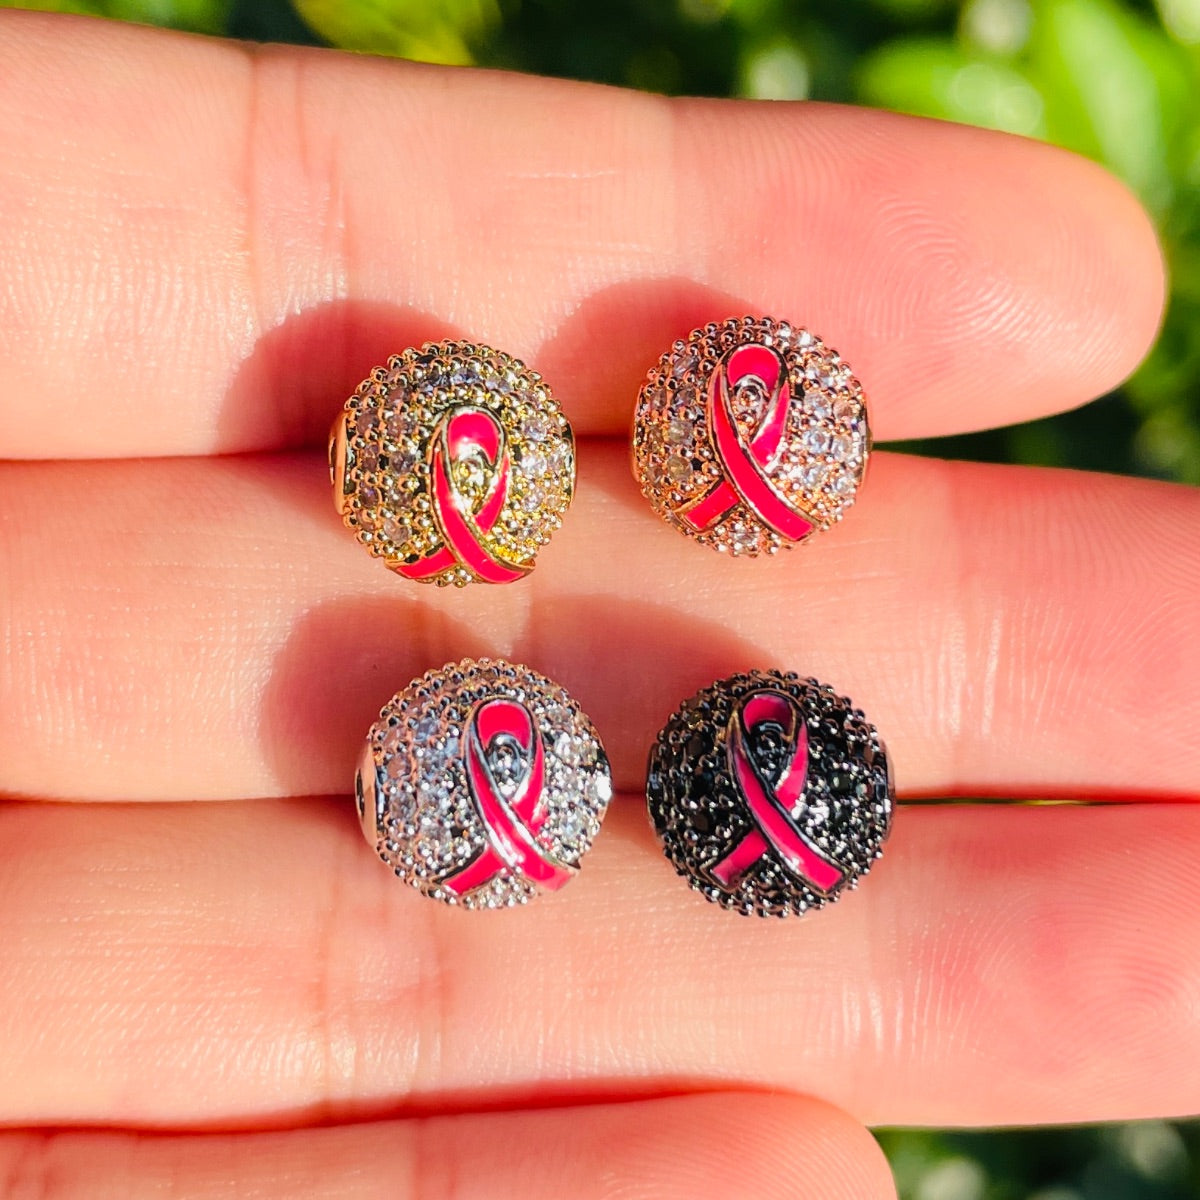 10-20-50pcs/lot 10mm CZ Paved Breast Cancer Awareness Pink Ribbon Ball Spacers Beads CZ Paved Spacers 10mm Beads Ball Beads Breast Cancer Awareness New Spacers Arrivals Charms Beads Beyond